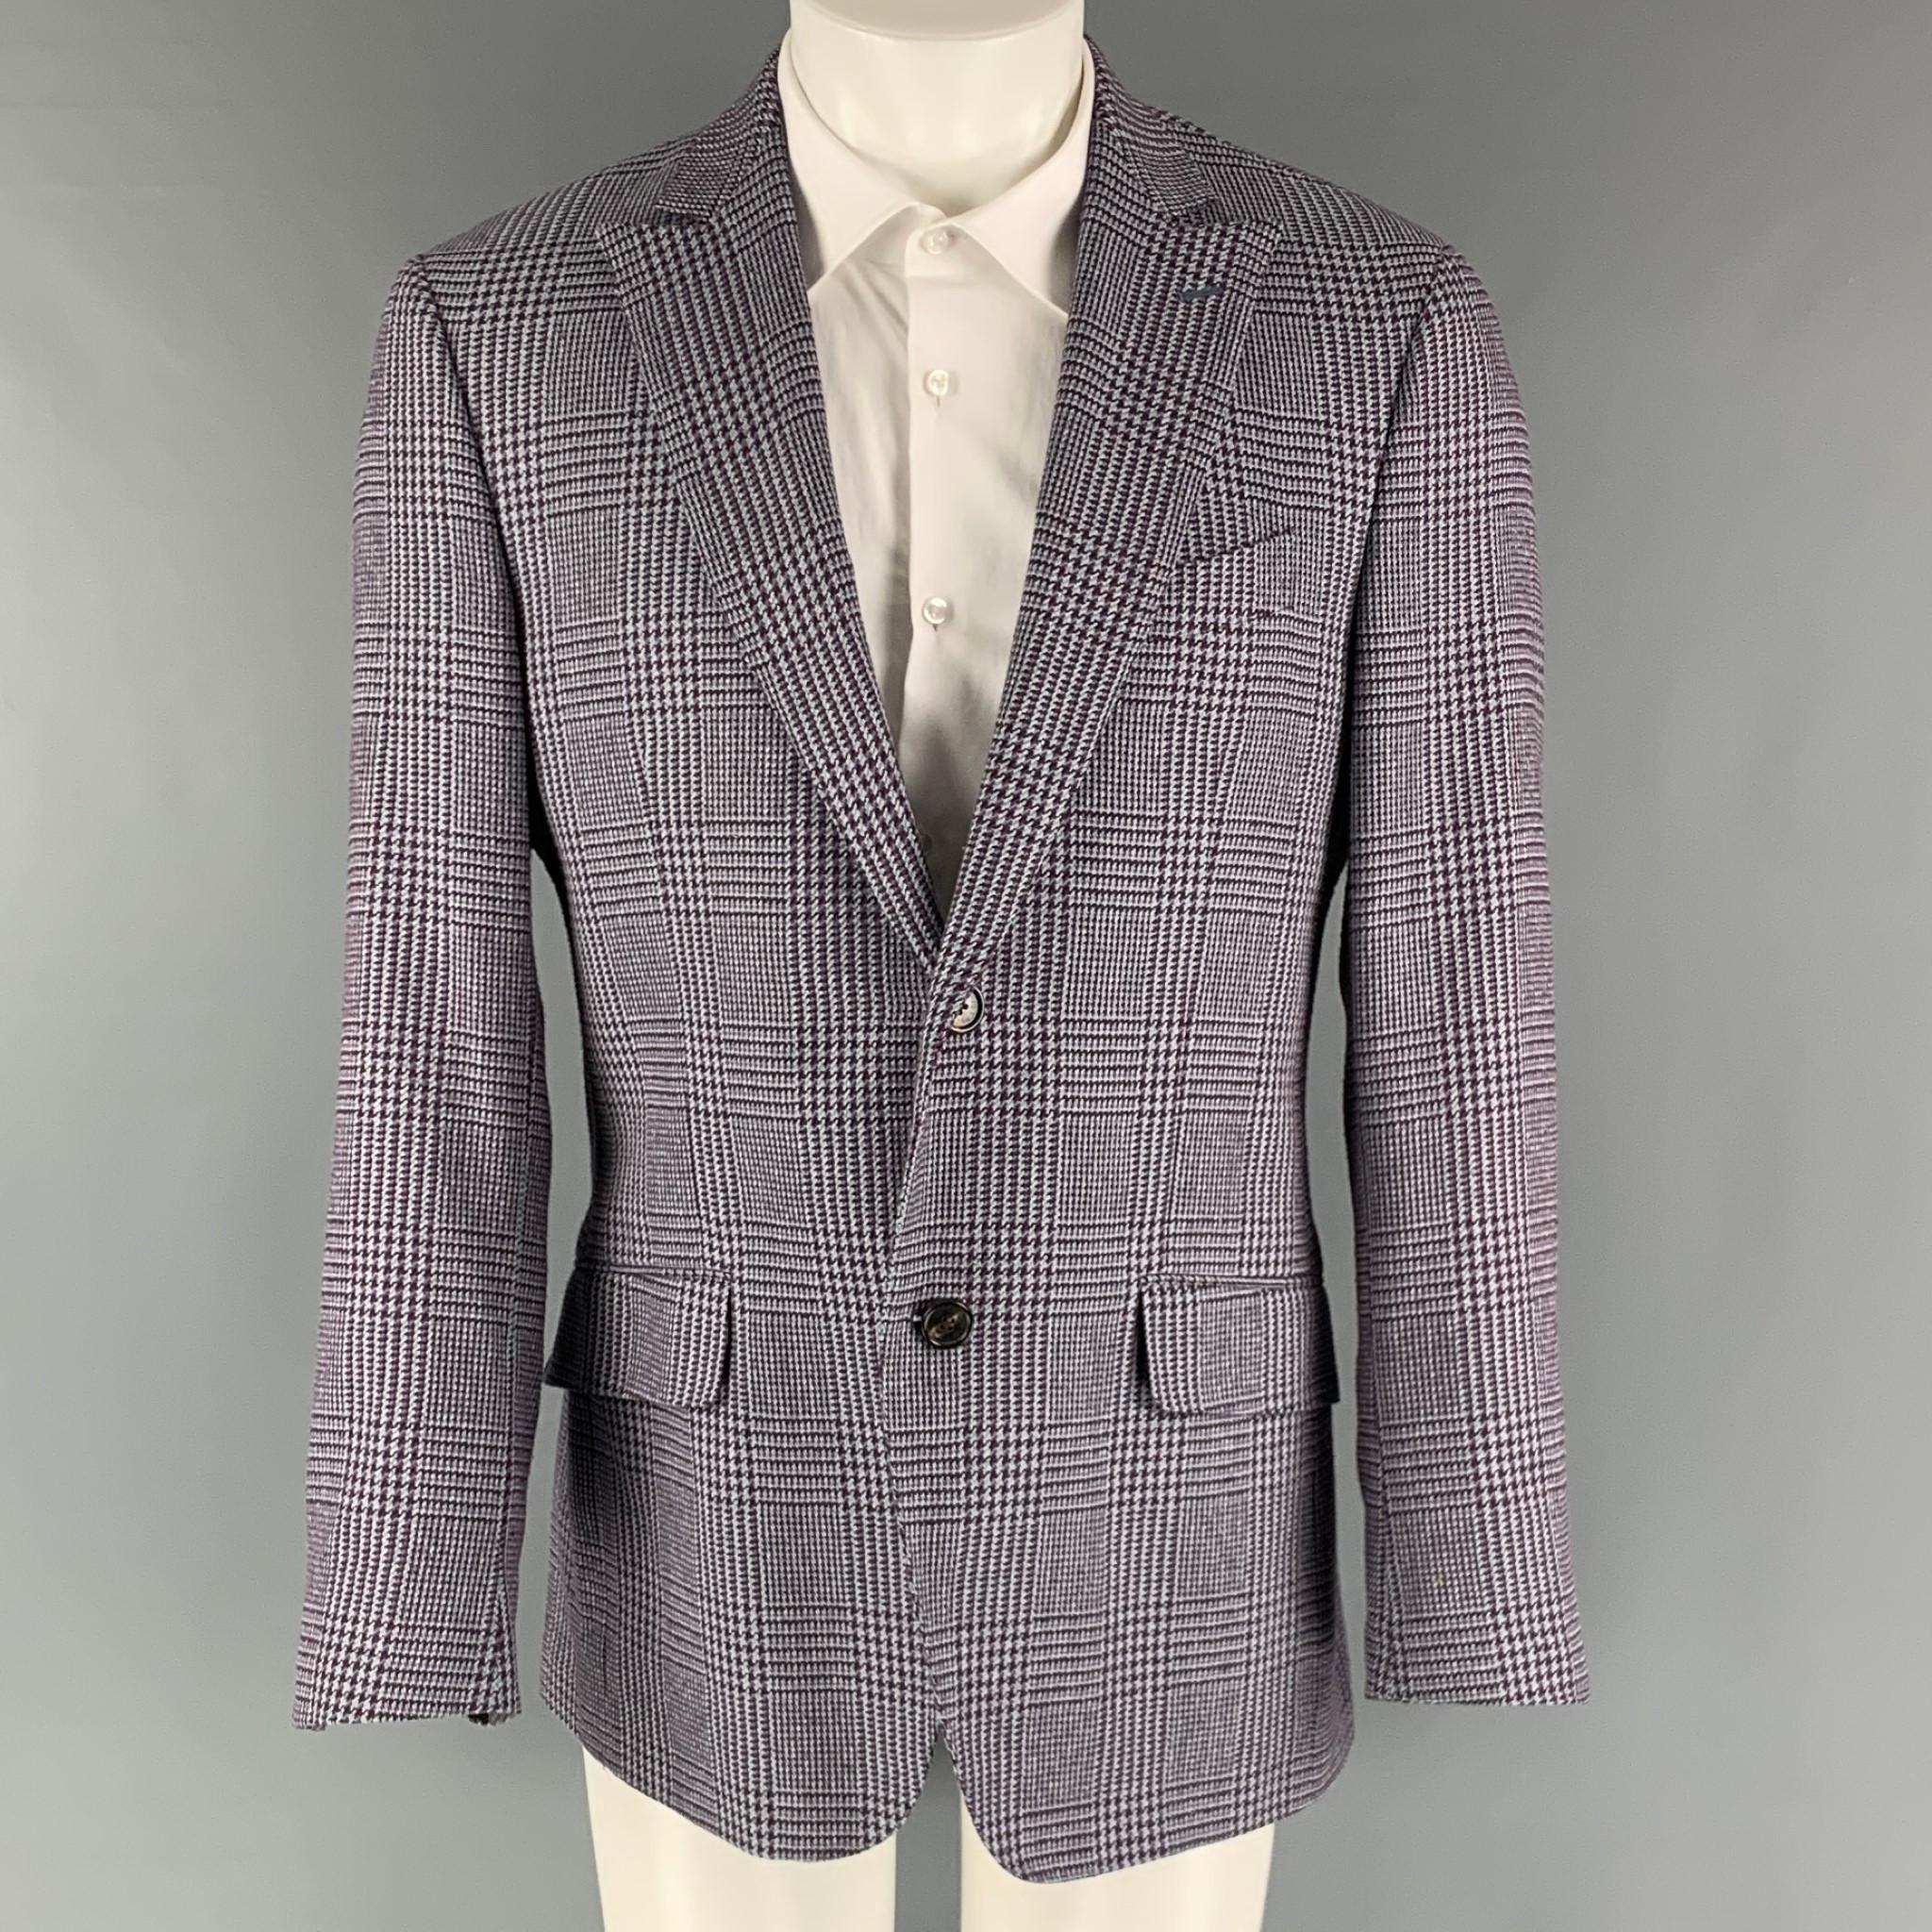 ETRO sport coat comes in a purple and blue plaid cotton and silk woven material with a full lining featuring a peak lapel, flap pockets, double back vent, and a two button closure. Made in Italy.

Excellent Pre-Owned Condition.
Marked: IT